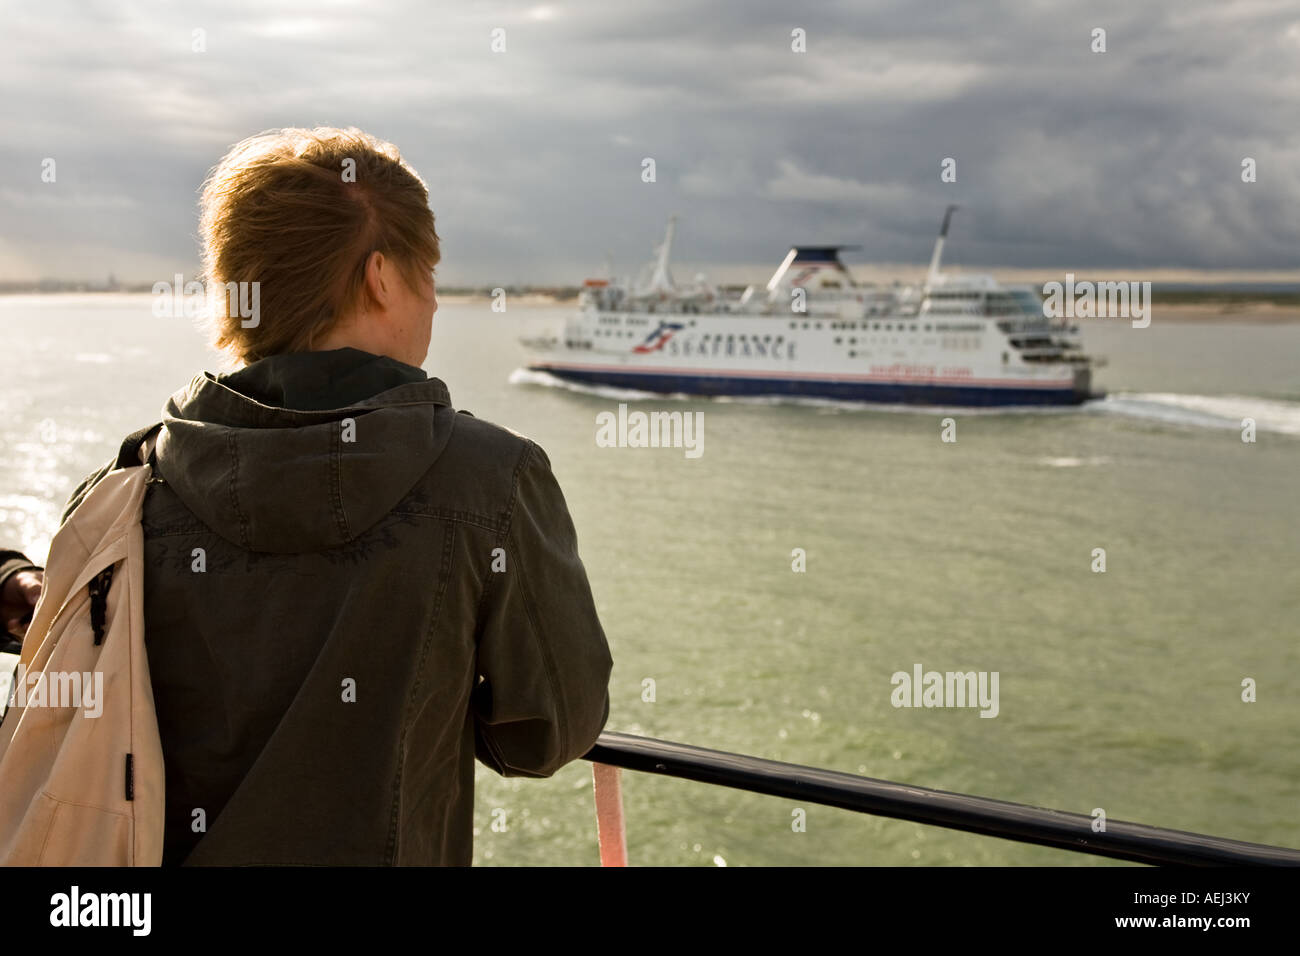 P&O ferry passenger crossing the English Channel. Stock Photo